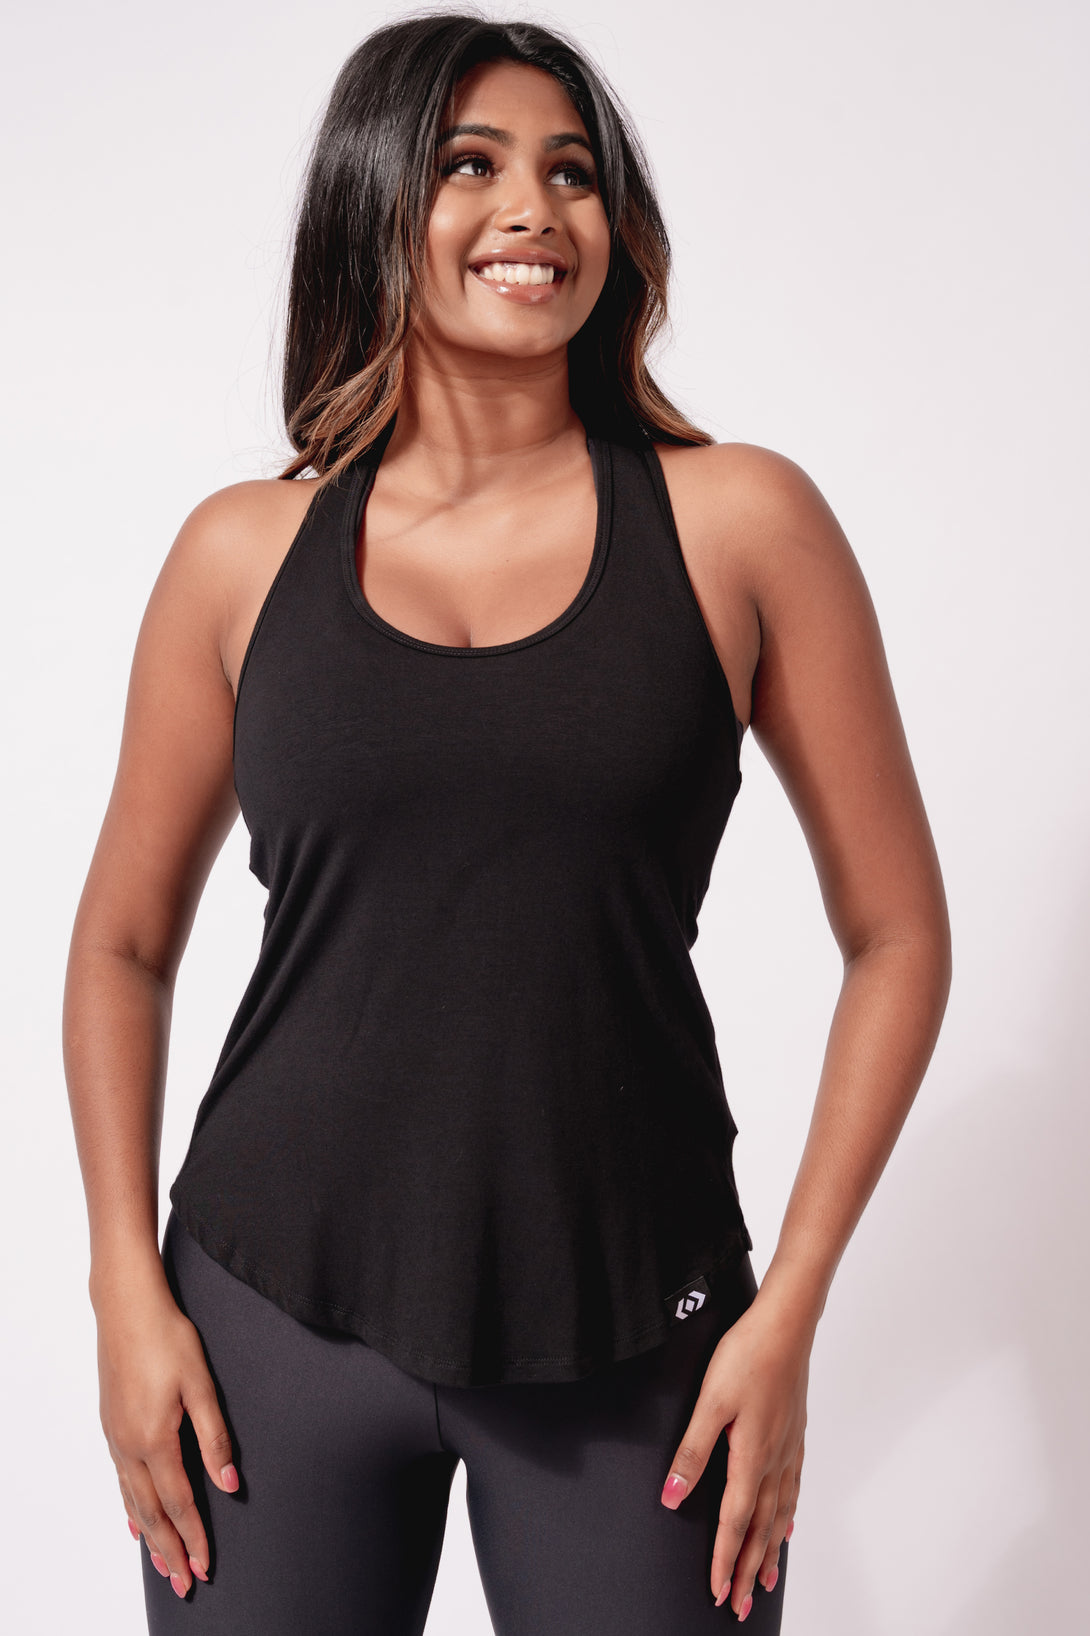 (R2W) Black Slinky To Touch - Racer Back Tank Top - Exoticathletica